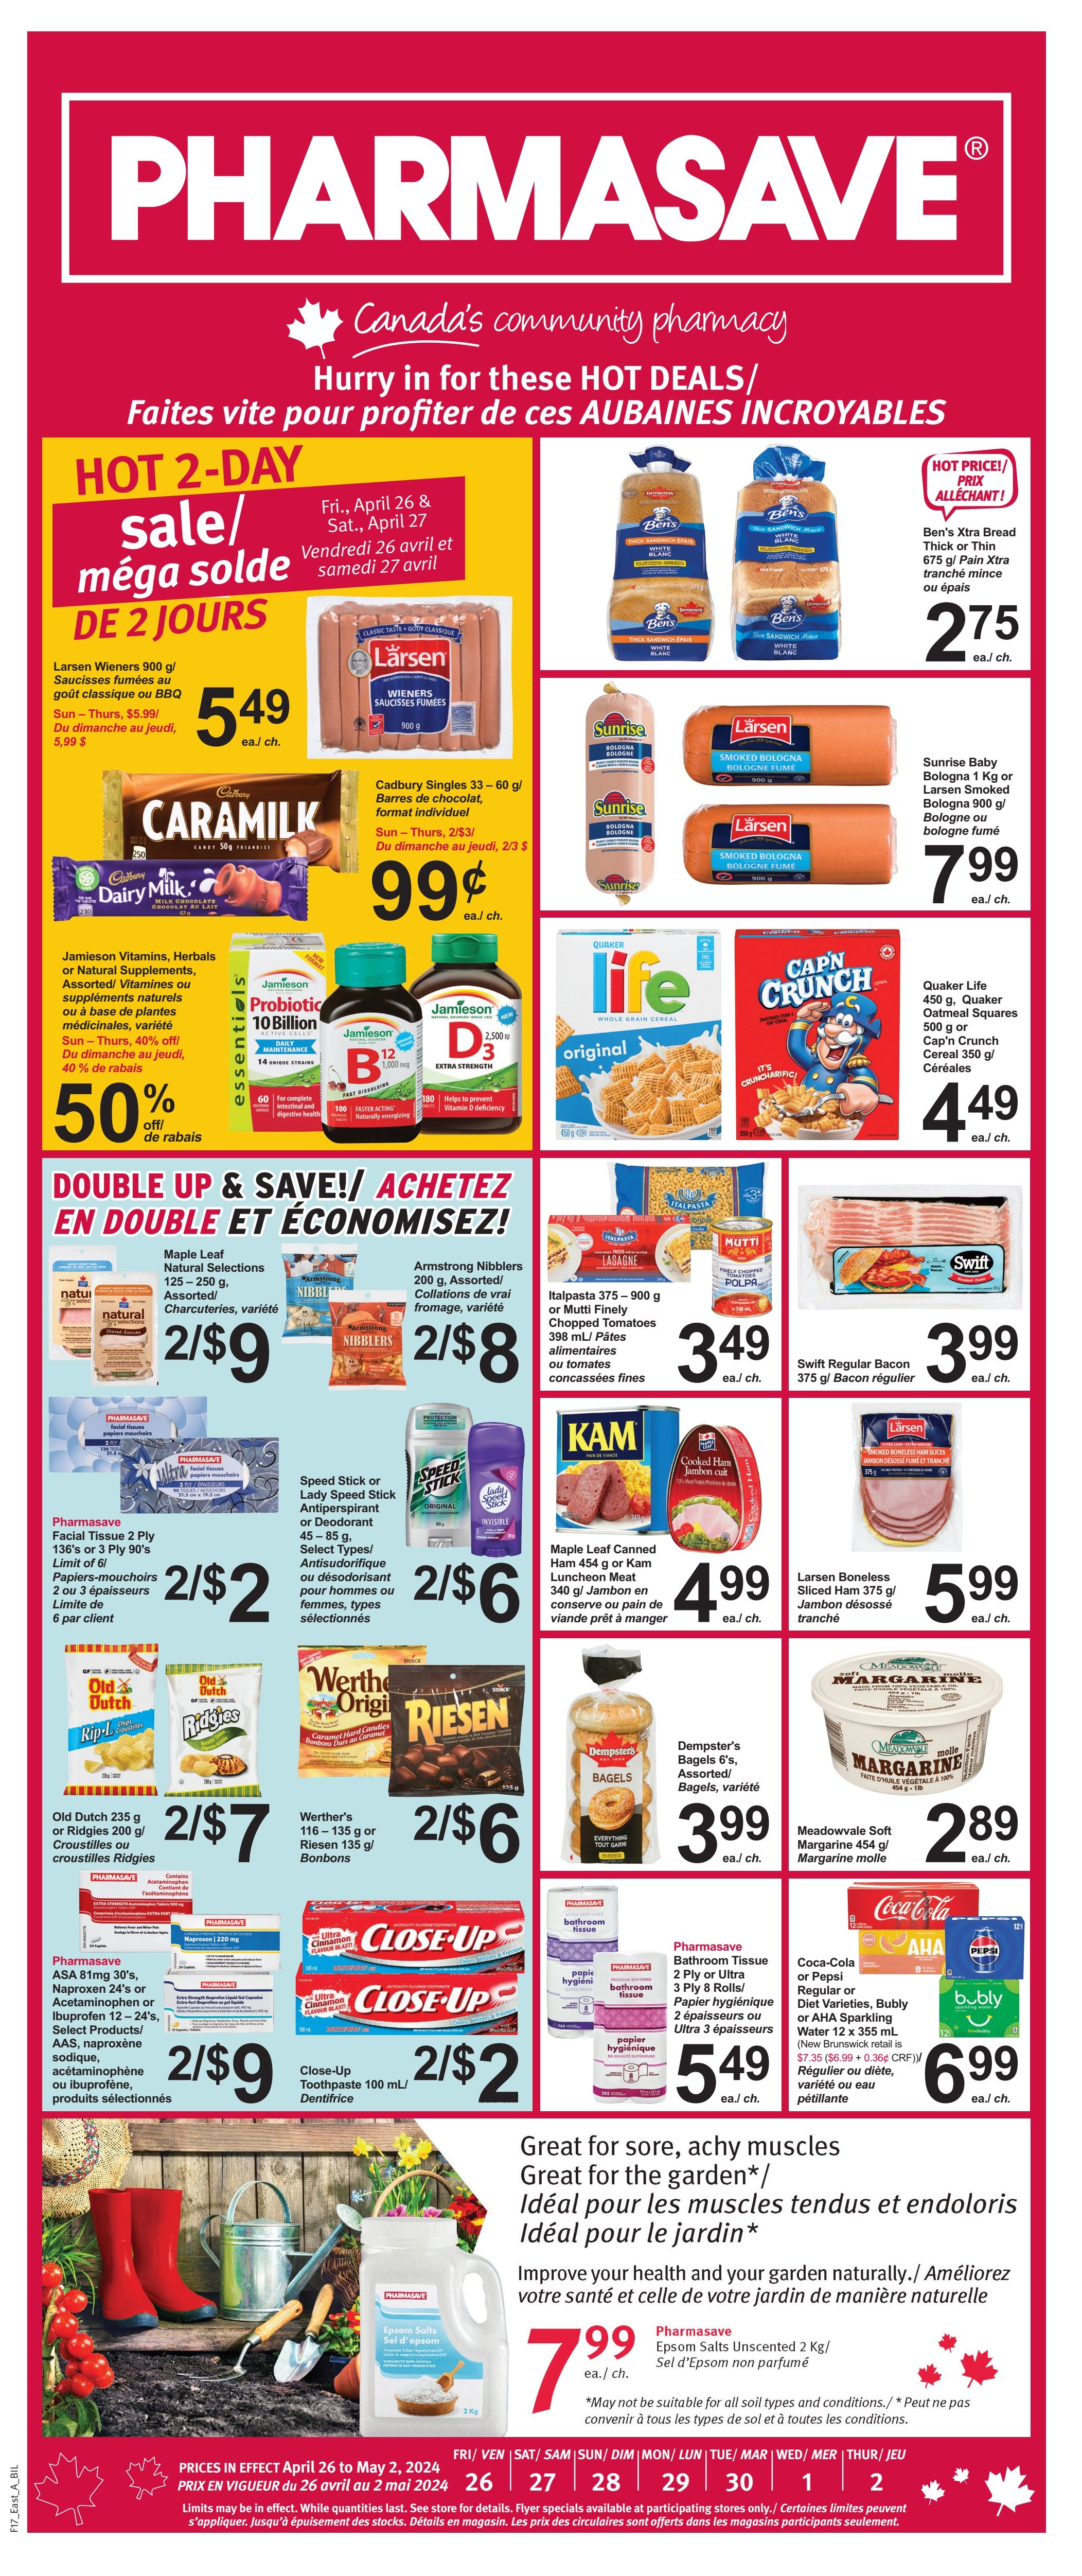 Pharmasave - New Brunswick - Weekly Flyer Specials